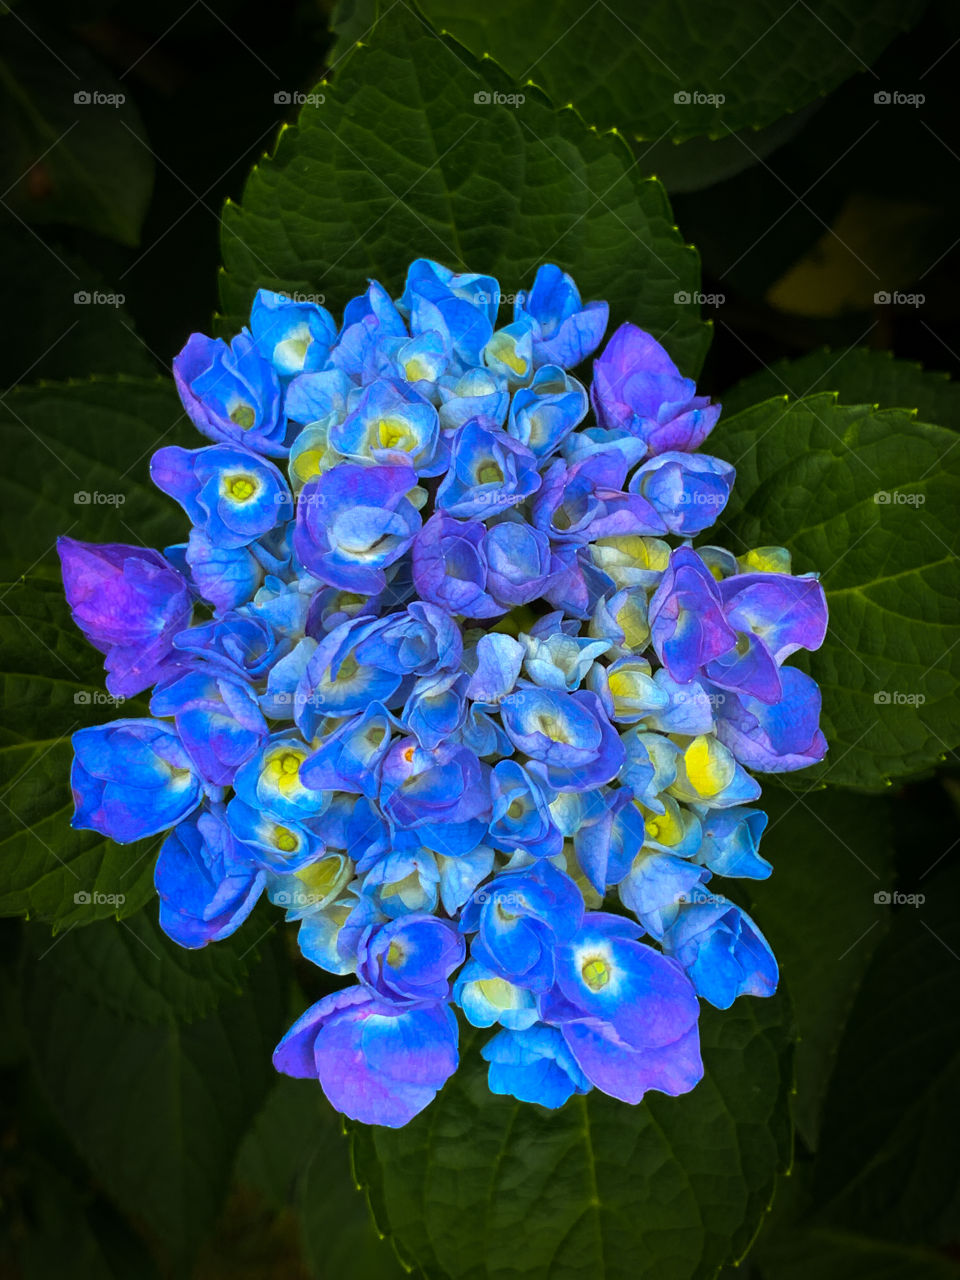 Beautiful bouquet of blue blooming petals on a bush, surrounded by dark green leaves on a summer’s day